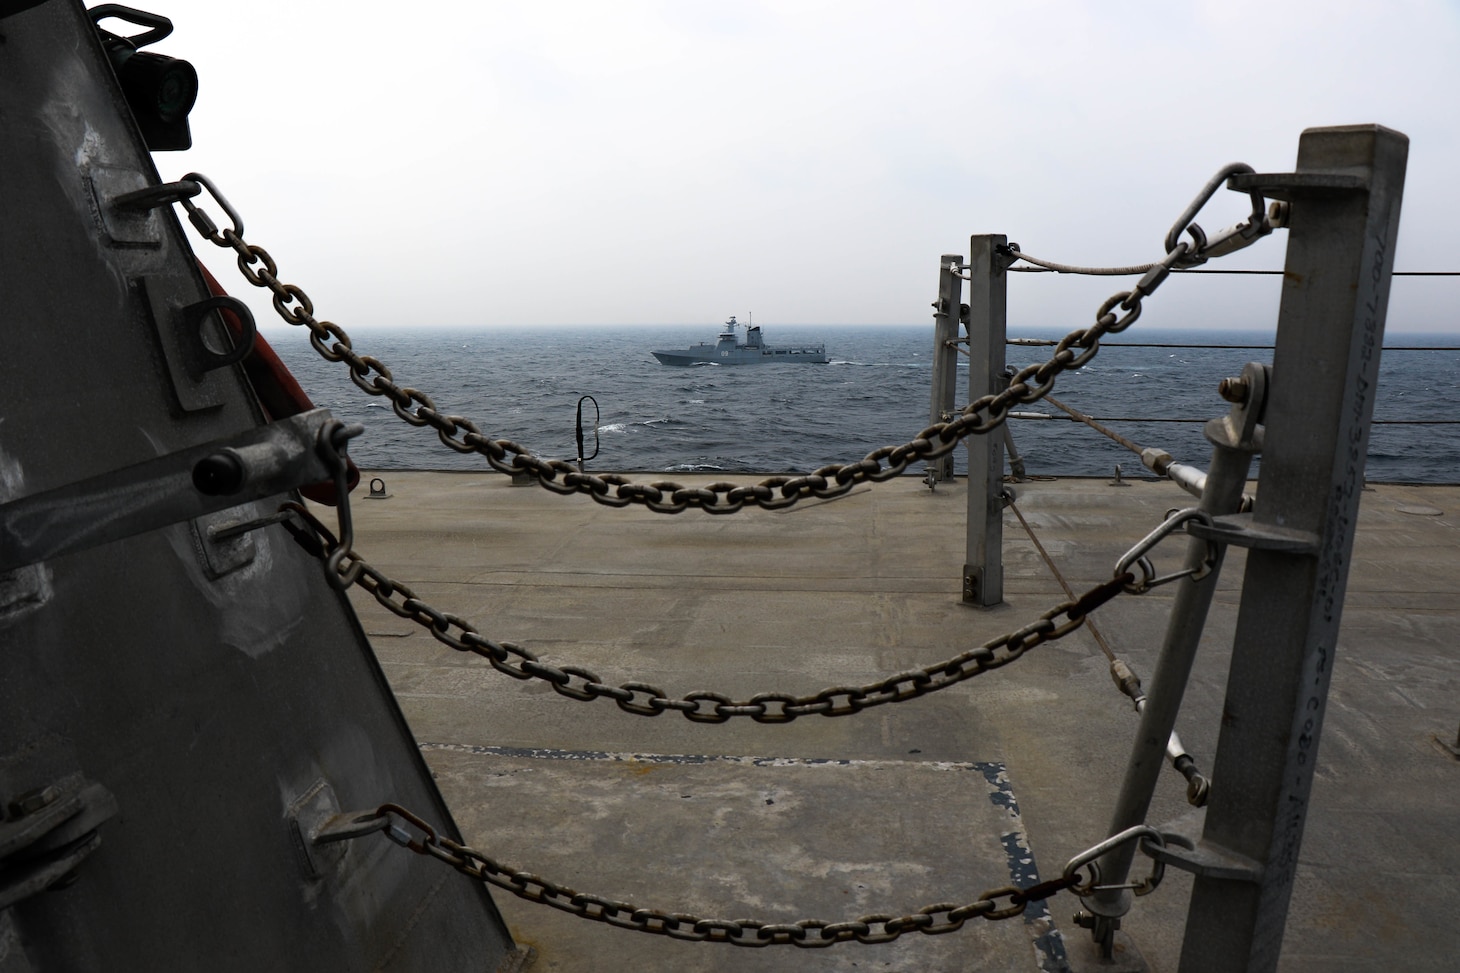 The Independence-variant littoral combat ship USS Jackson (LCS 6) exercises with the Royal Brunei Navy Darussalam-class offshore patrol vessel KDB Daruttaqwa (DTQ 09) in the South China Sea. Jackson, part of Destroyer Squadron (DESRON) 7, is on a rotational deployment in the U.S. 7th Fleet area of operation to enhance interoperability with partners and serve as a ready-response force in support of a free and open Indo-Pacific region.